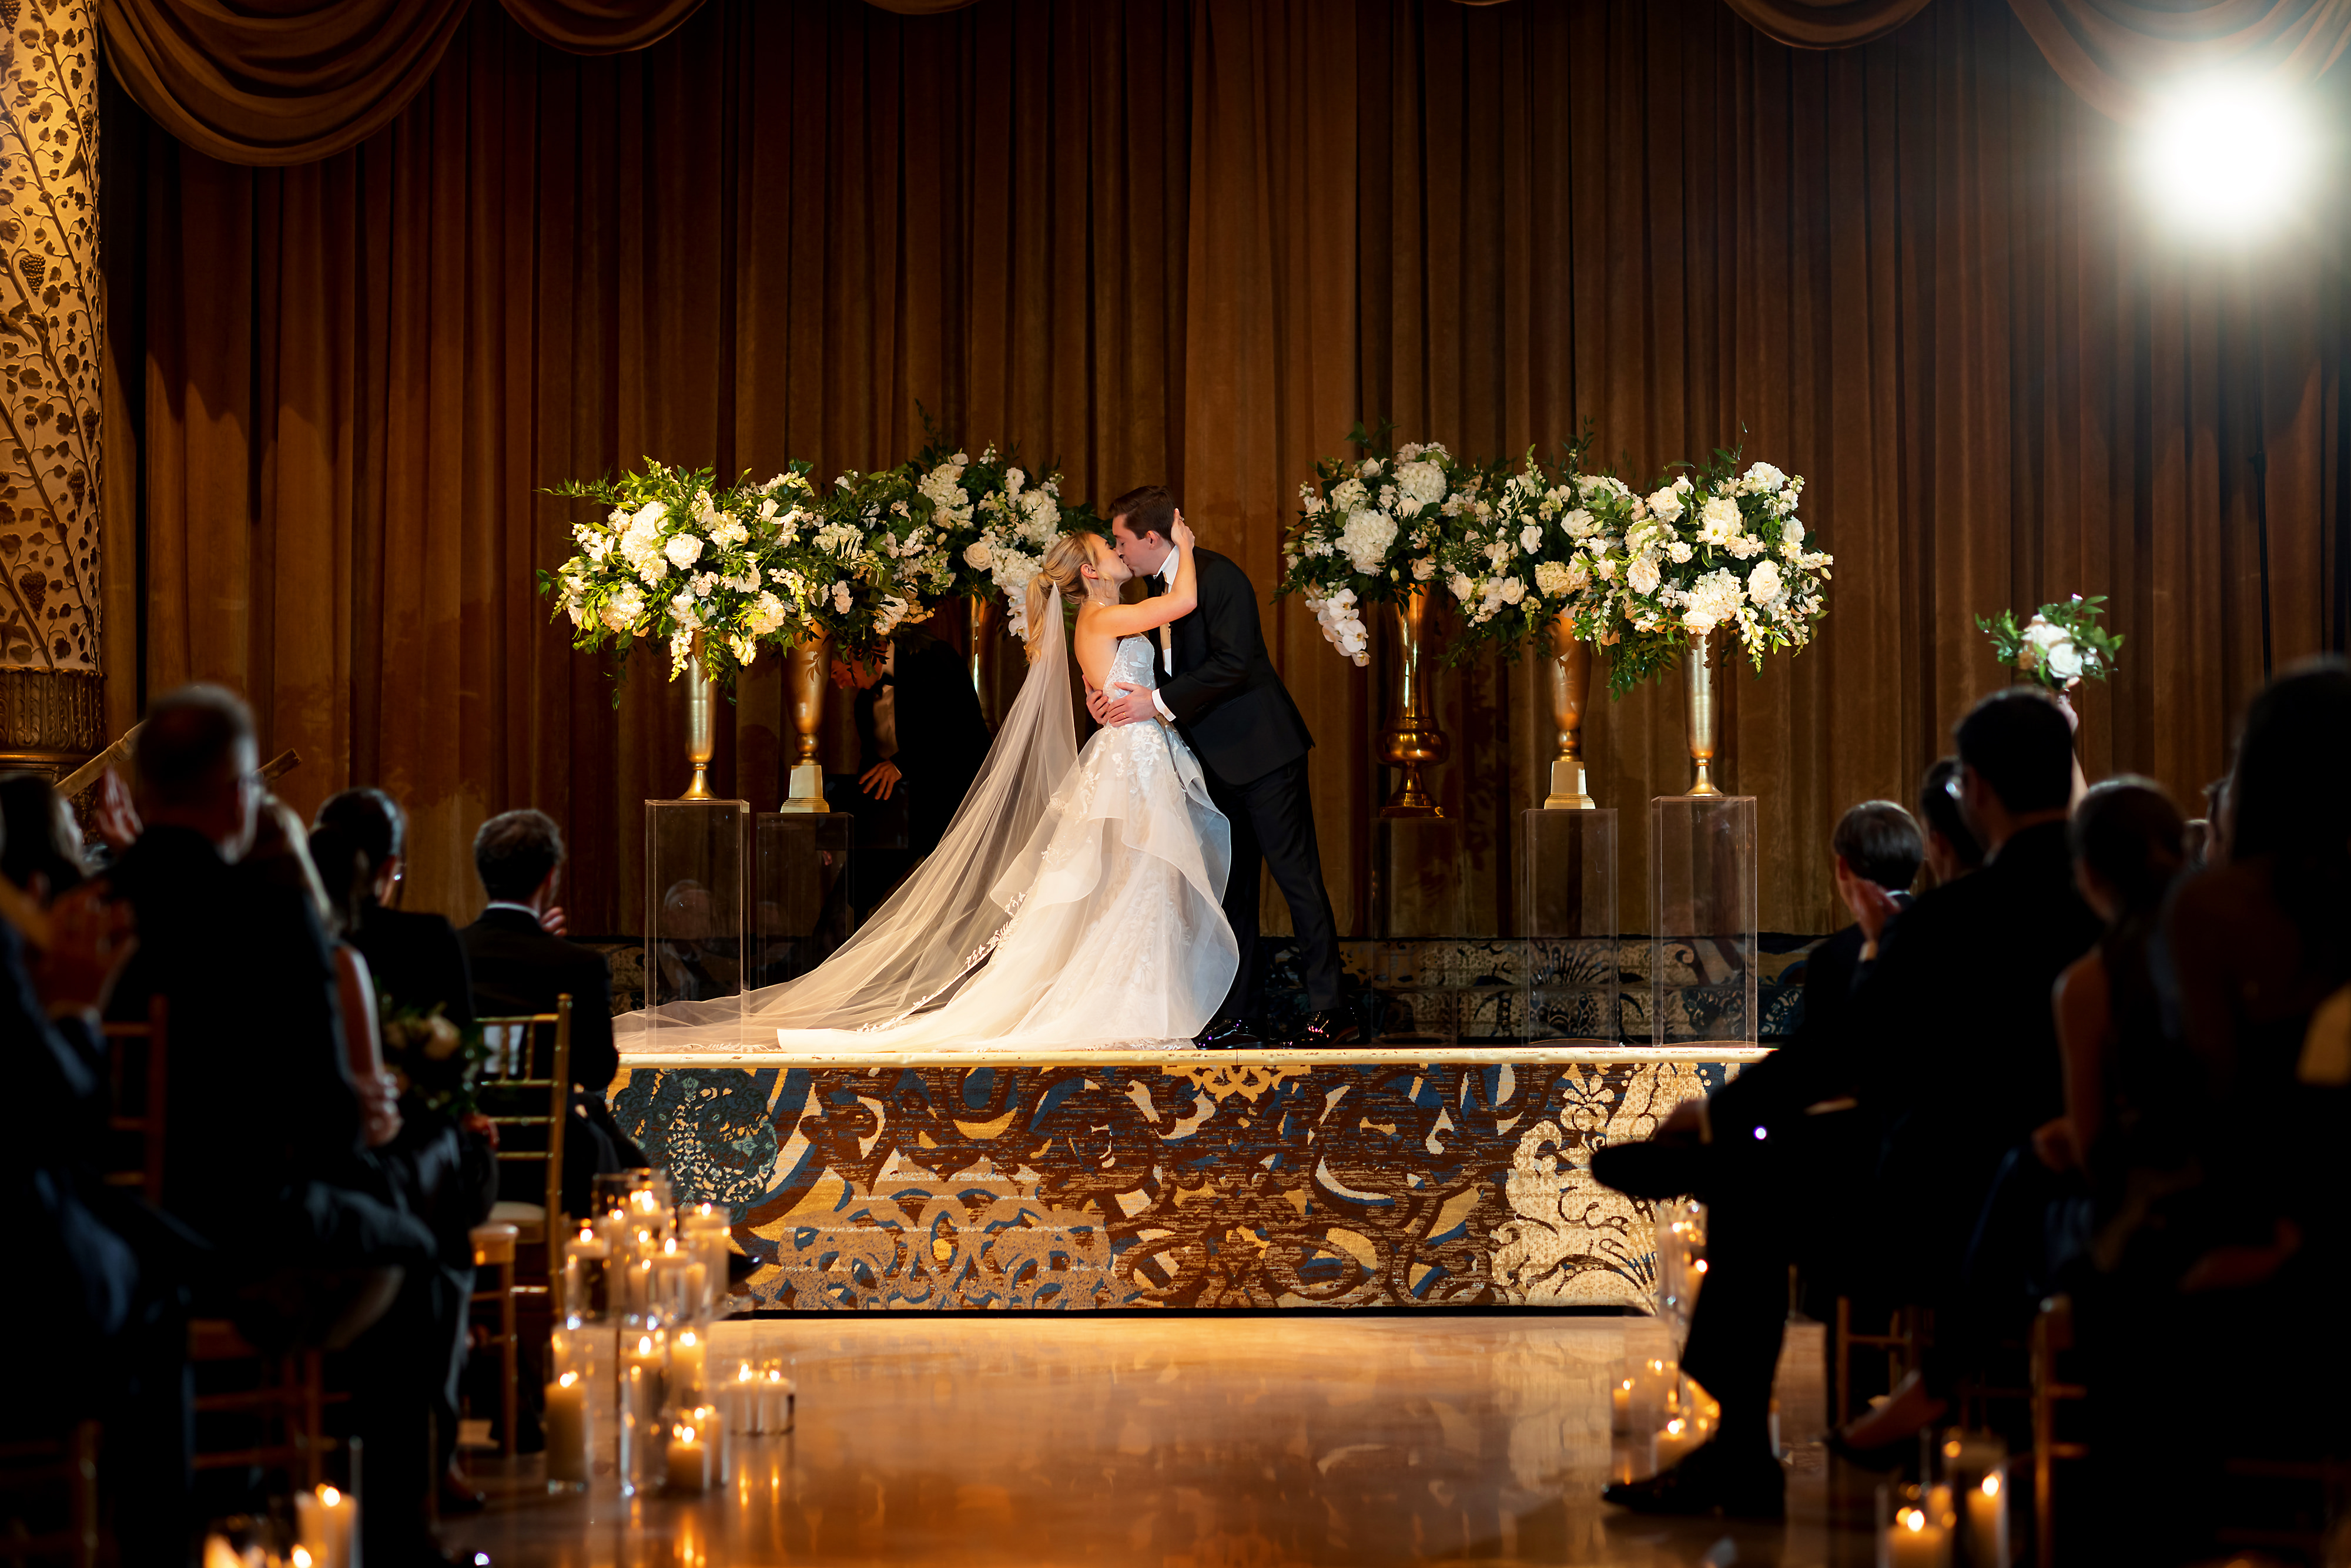 Bride and Groom kiss at the end of wedding ceremony in the Grand Ballroom at The Drake Hotel in Chicago